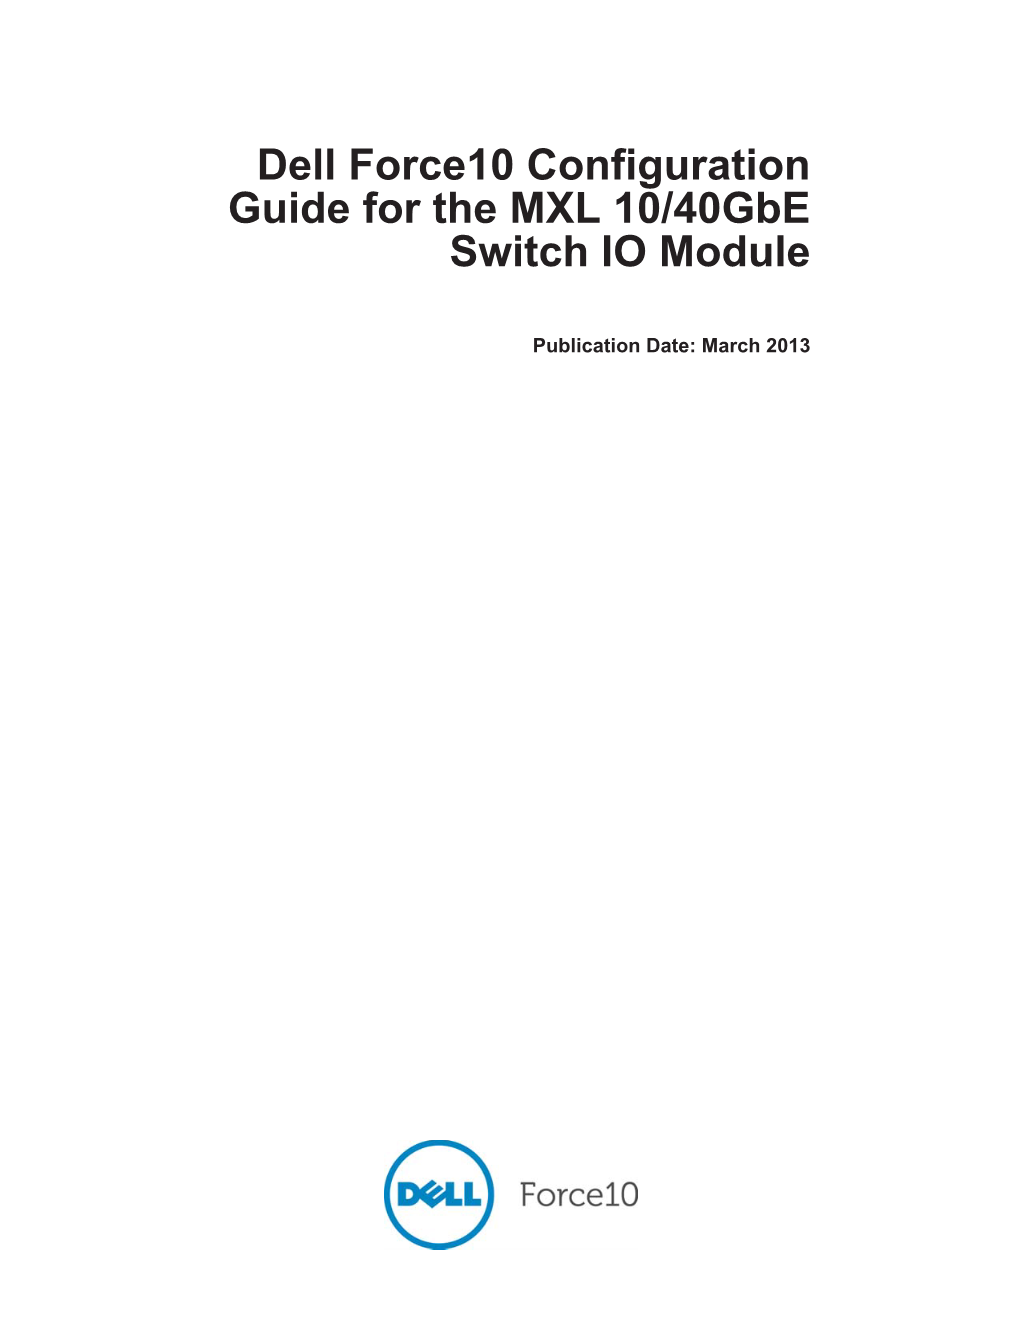 FTOS 8.3.16.4 Configuration Guide for the MXL 10/40Gbe Switch IO Module